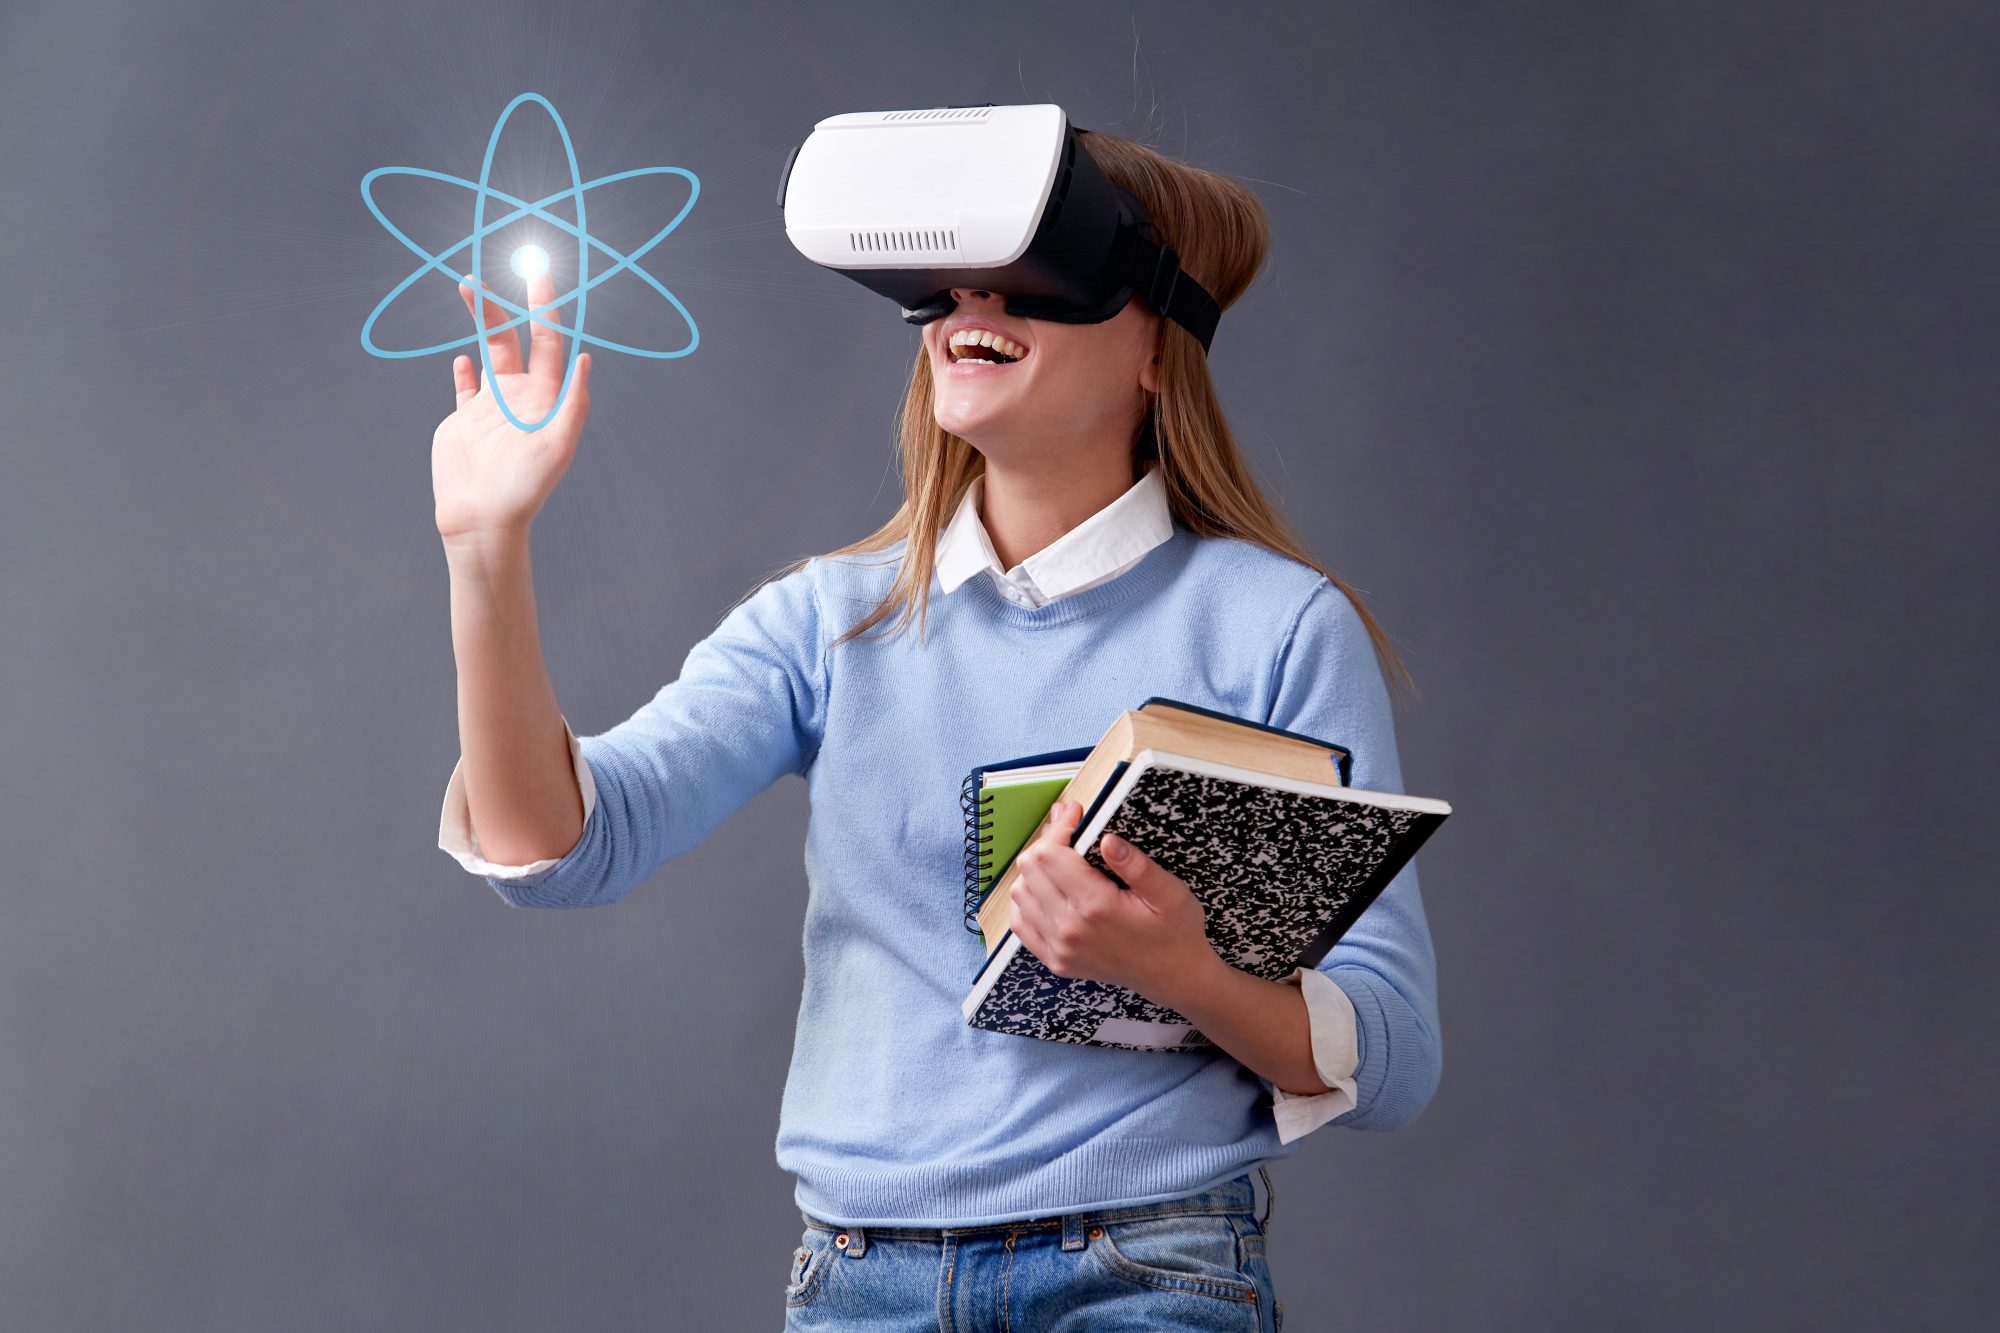 Is augmented and virtual reality technology essential for education?